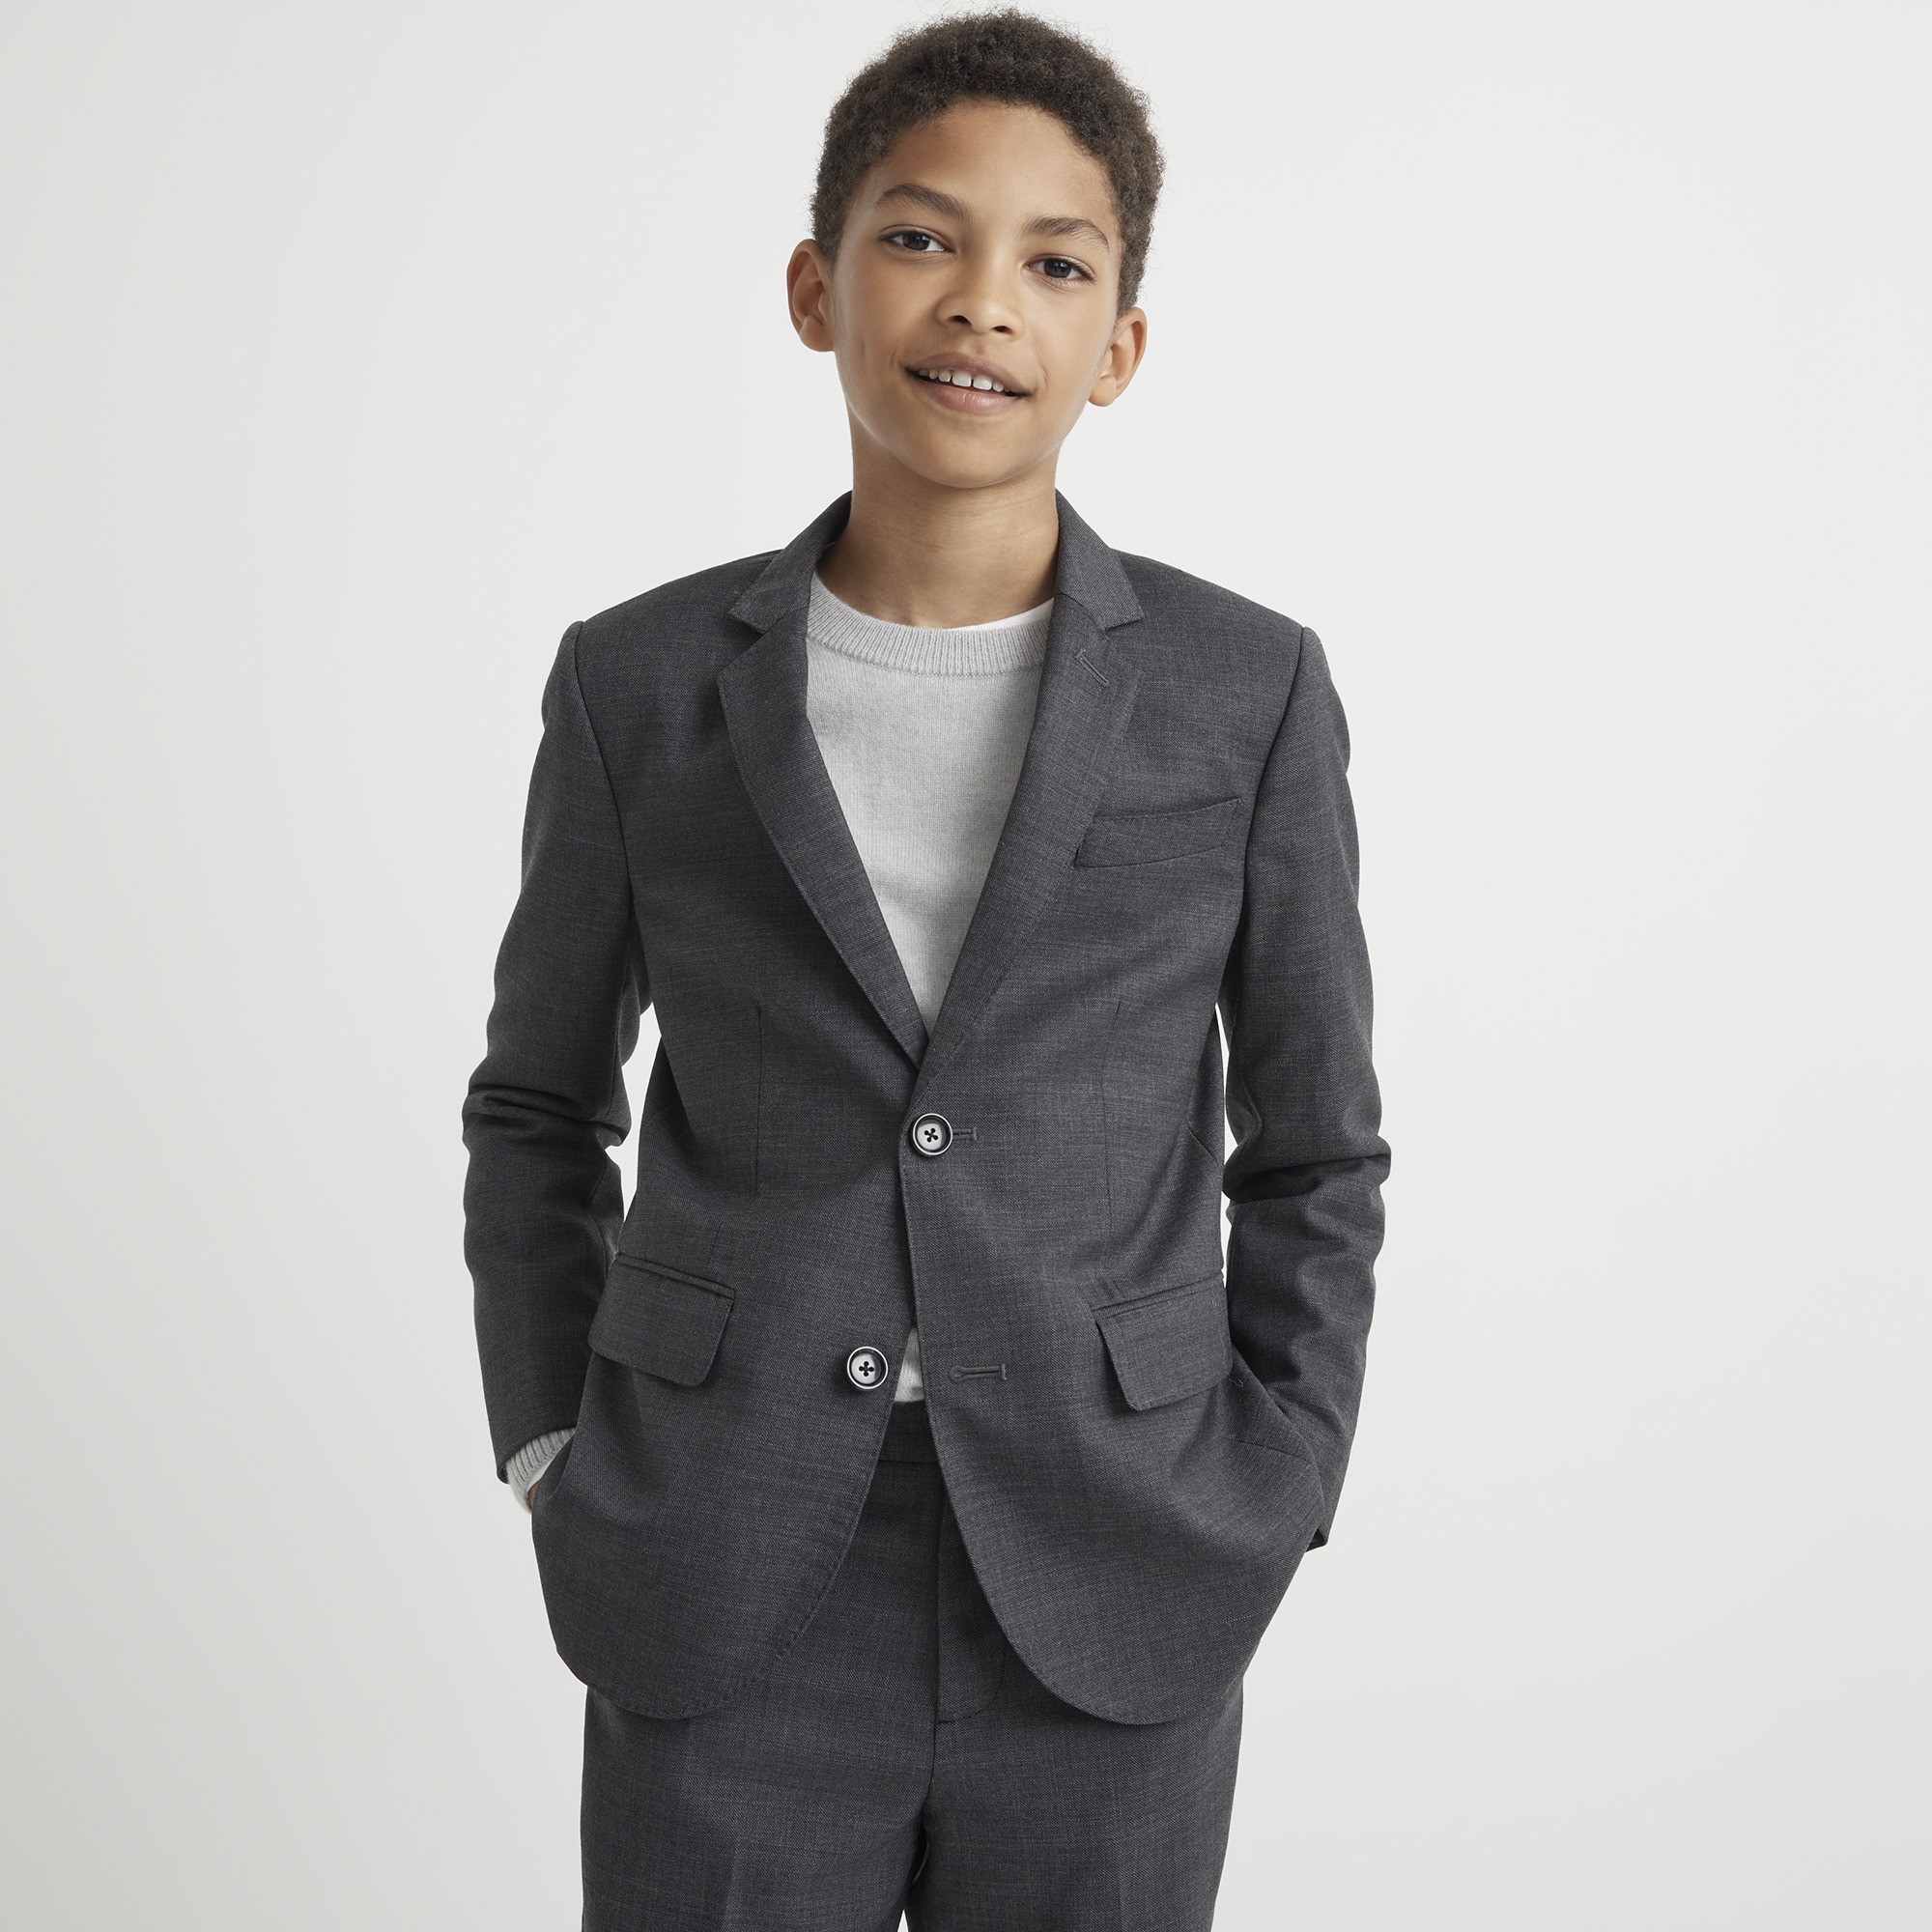 Jcrew Boys Ludlow suit jacket in stretch worsted wool blend